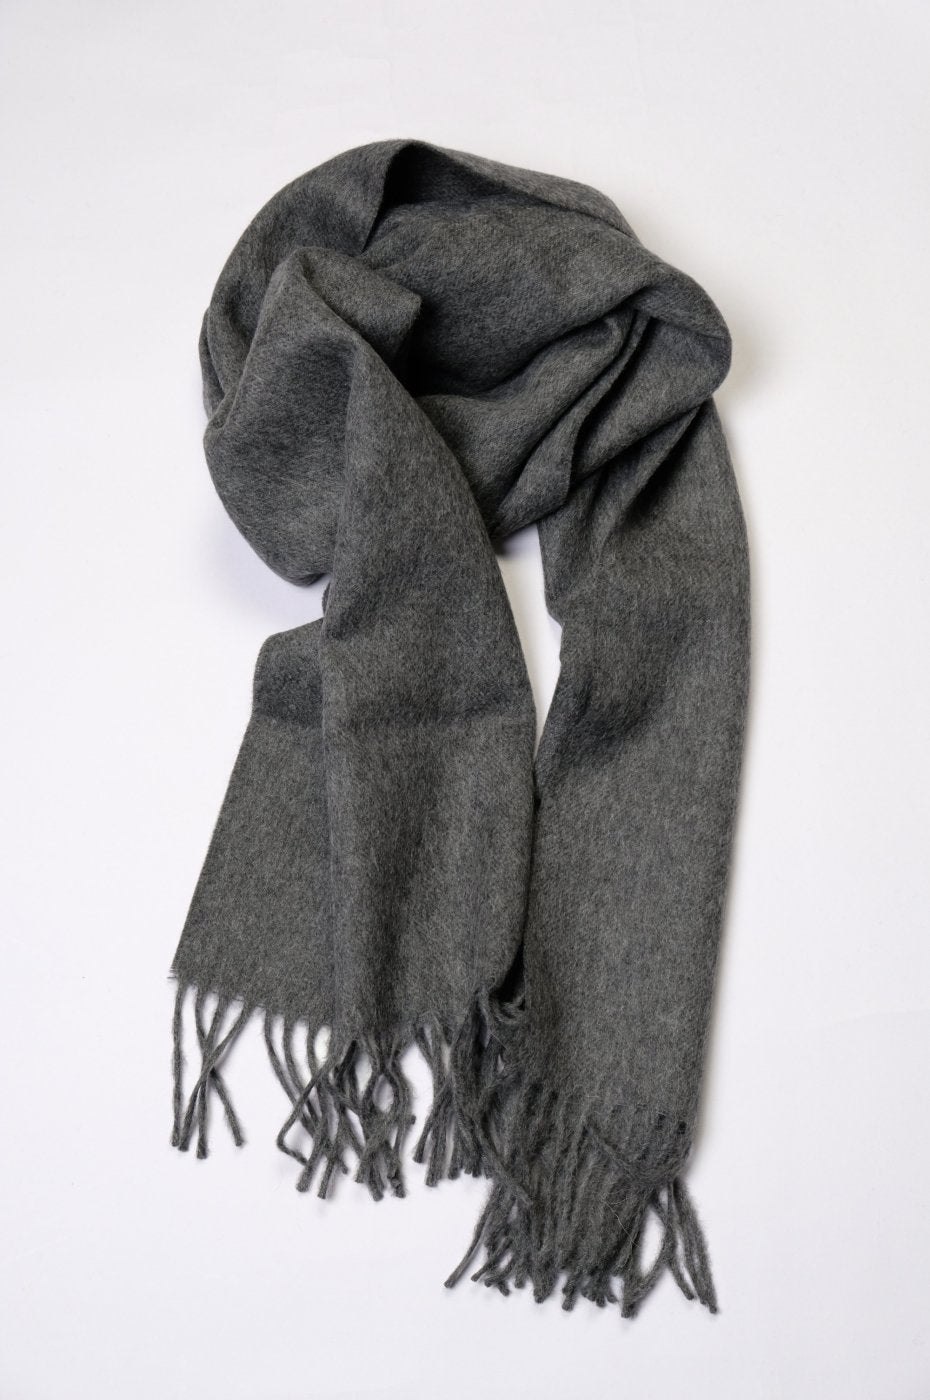 THE INOUE BROTHERS... "BRUSHED SCARF / GREY"